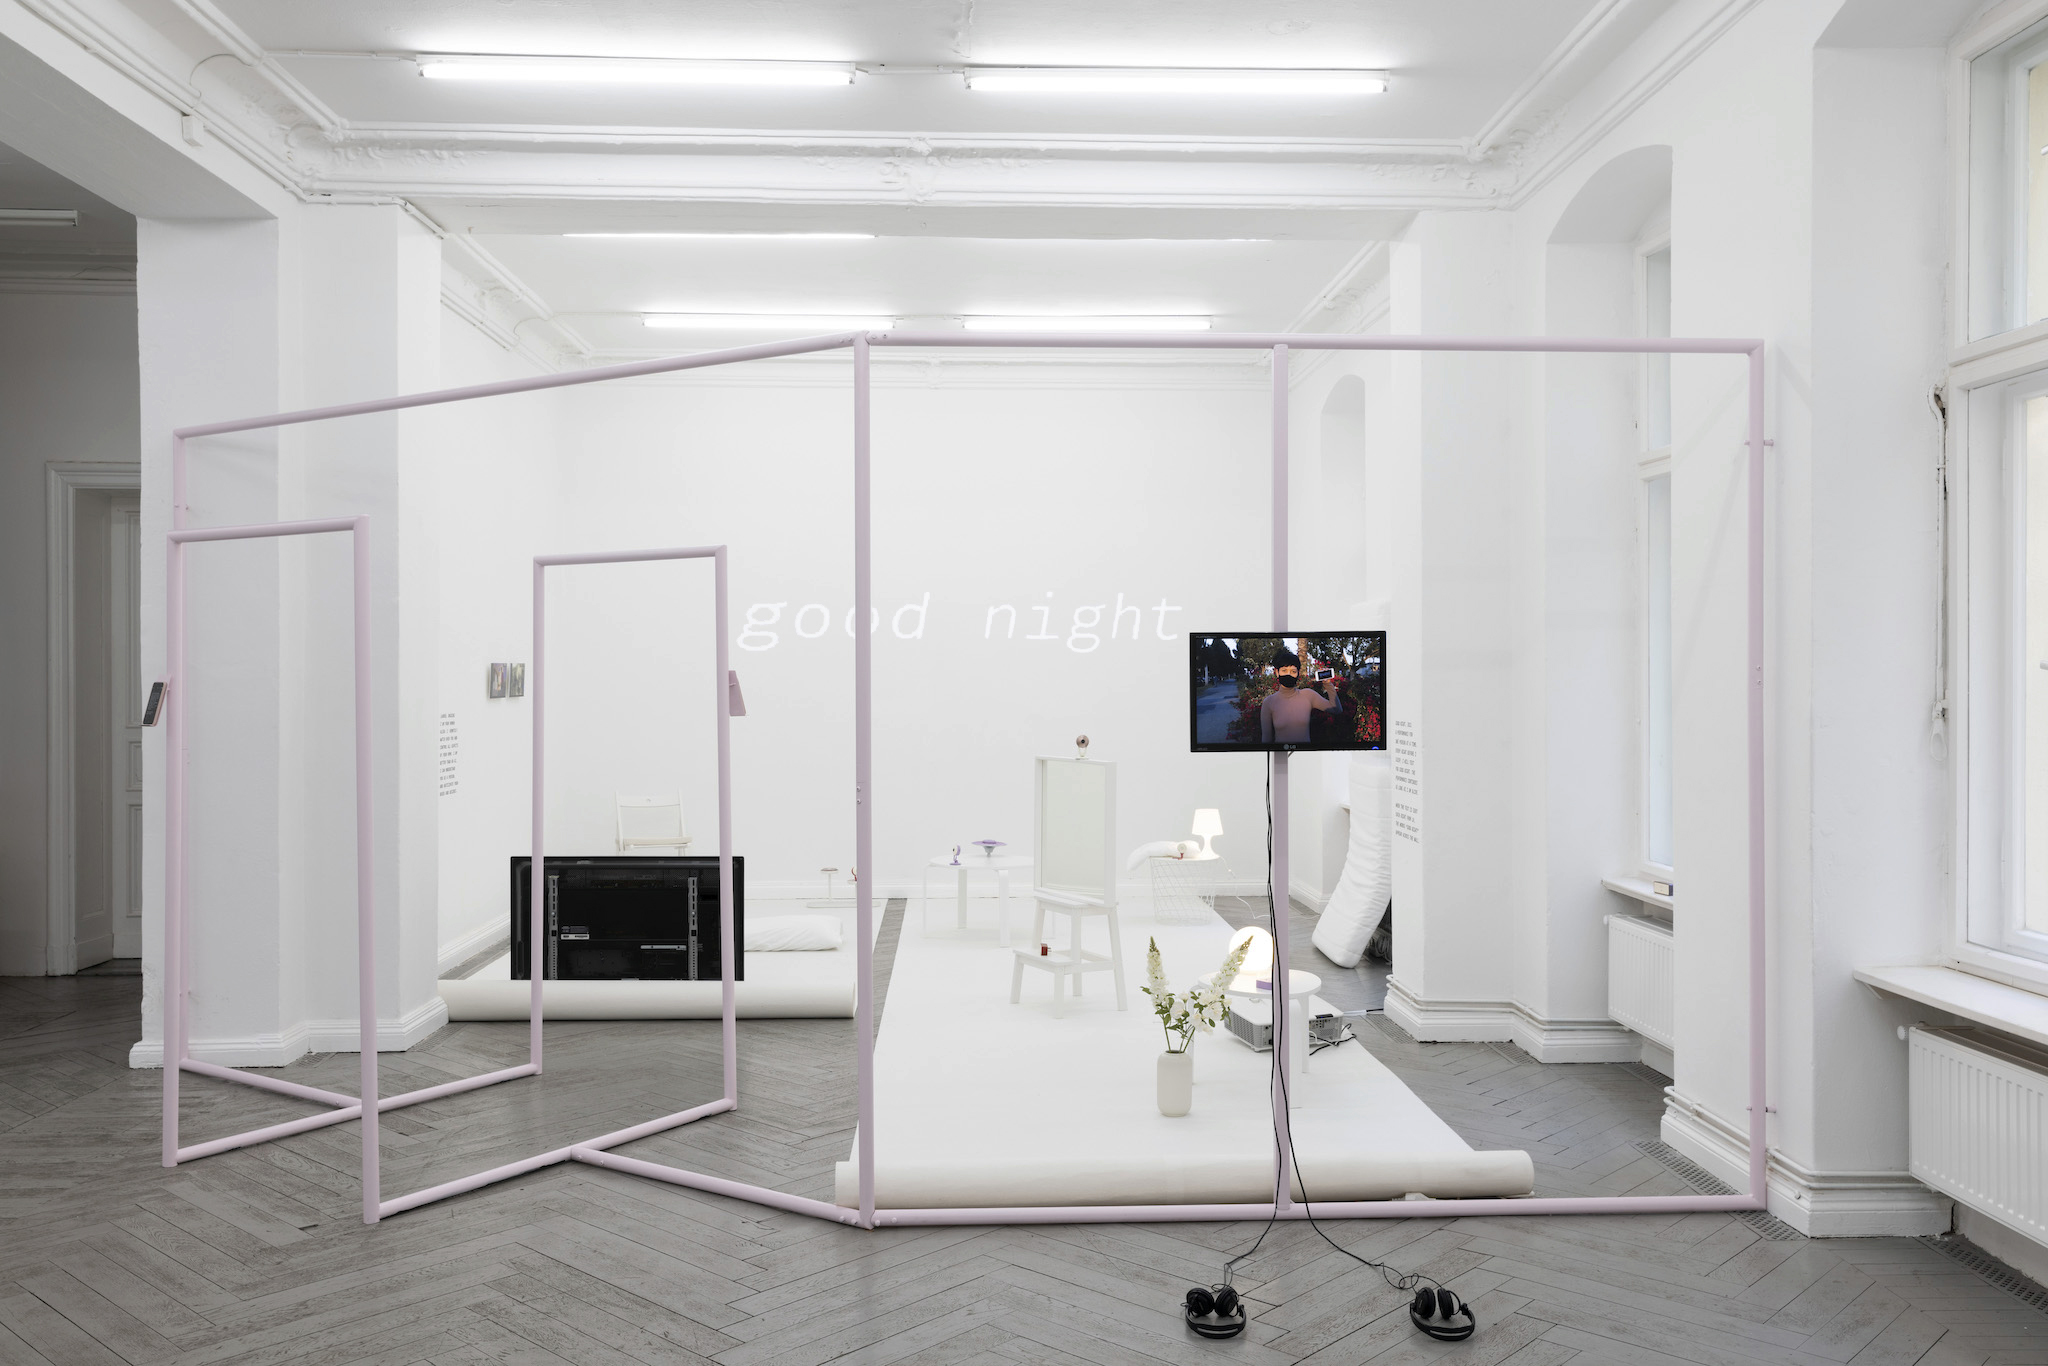 A photo of an installation of Lauren Lee McCarthy's work, involving a sculptural installation with monitors and a projection with the words "good night", in a white cube gallery